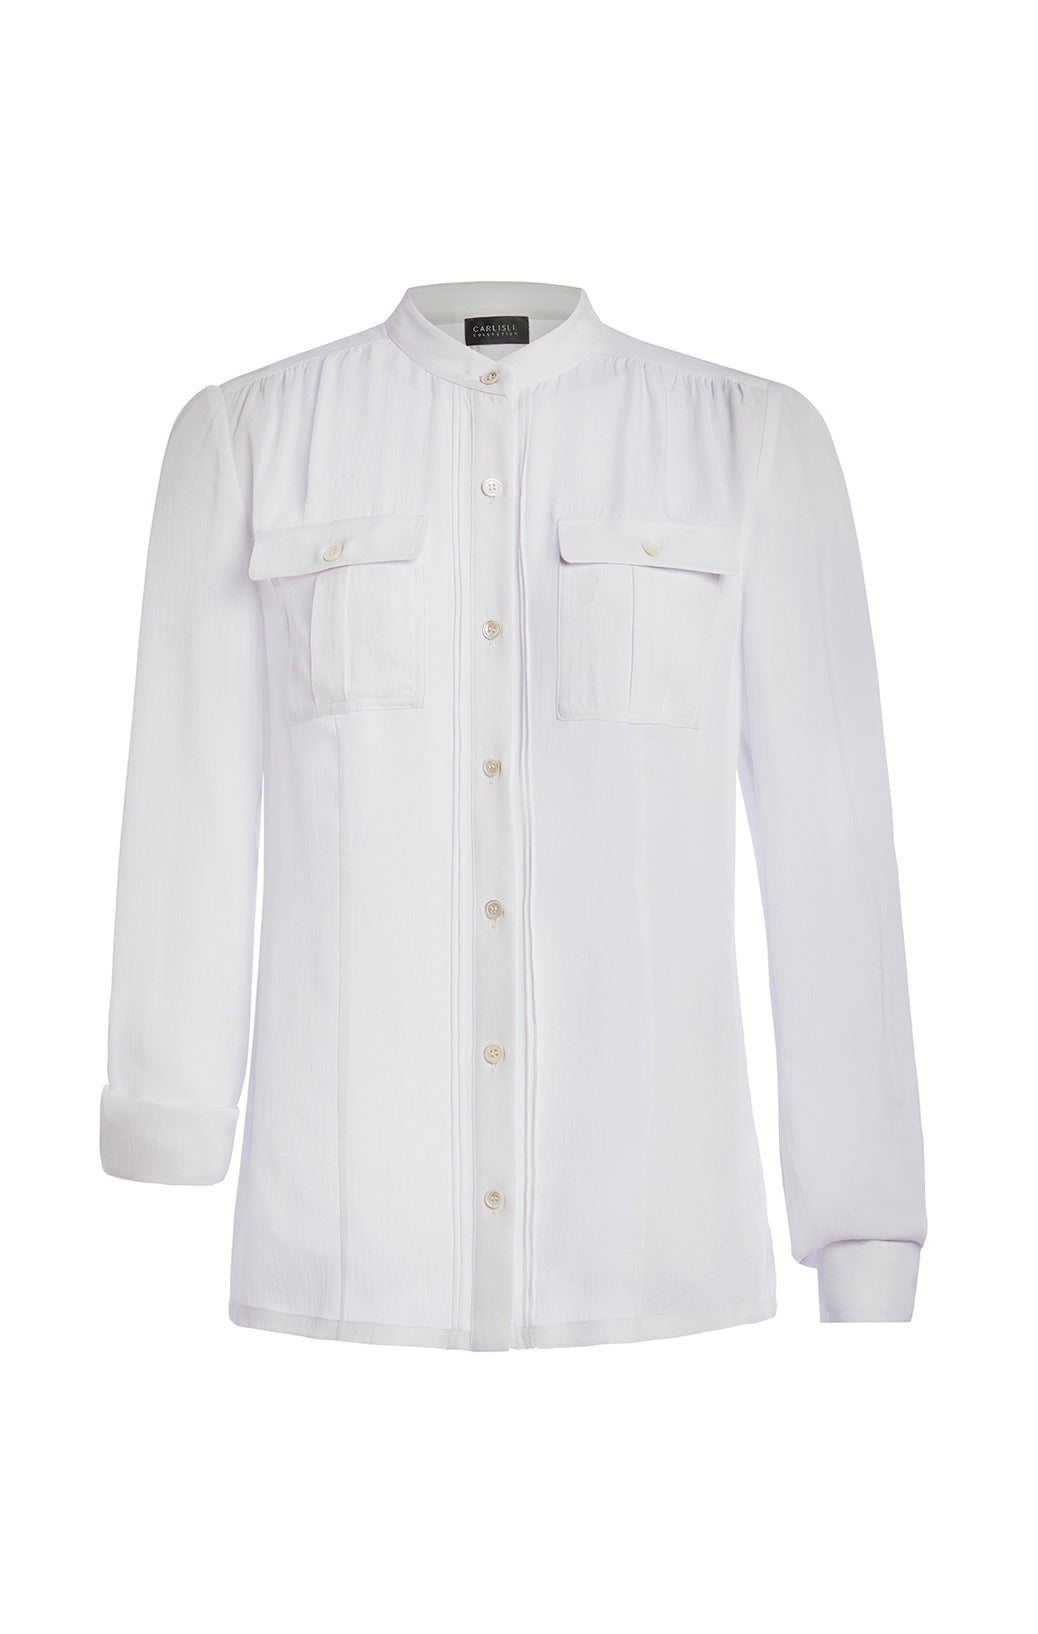 Palisade - White Stretch Sateen Blouse - Product Image